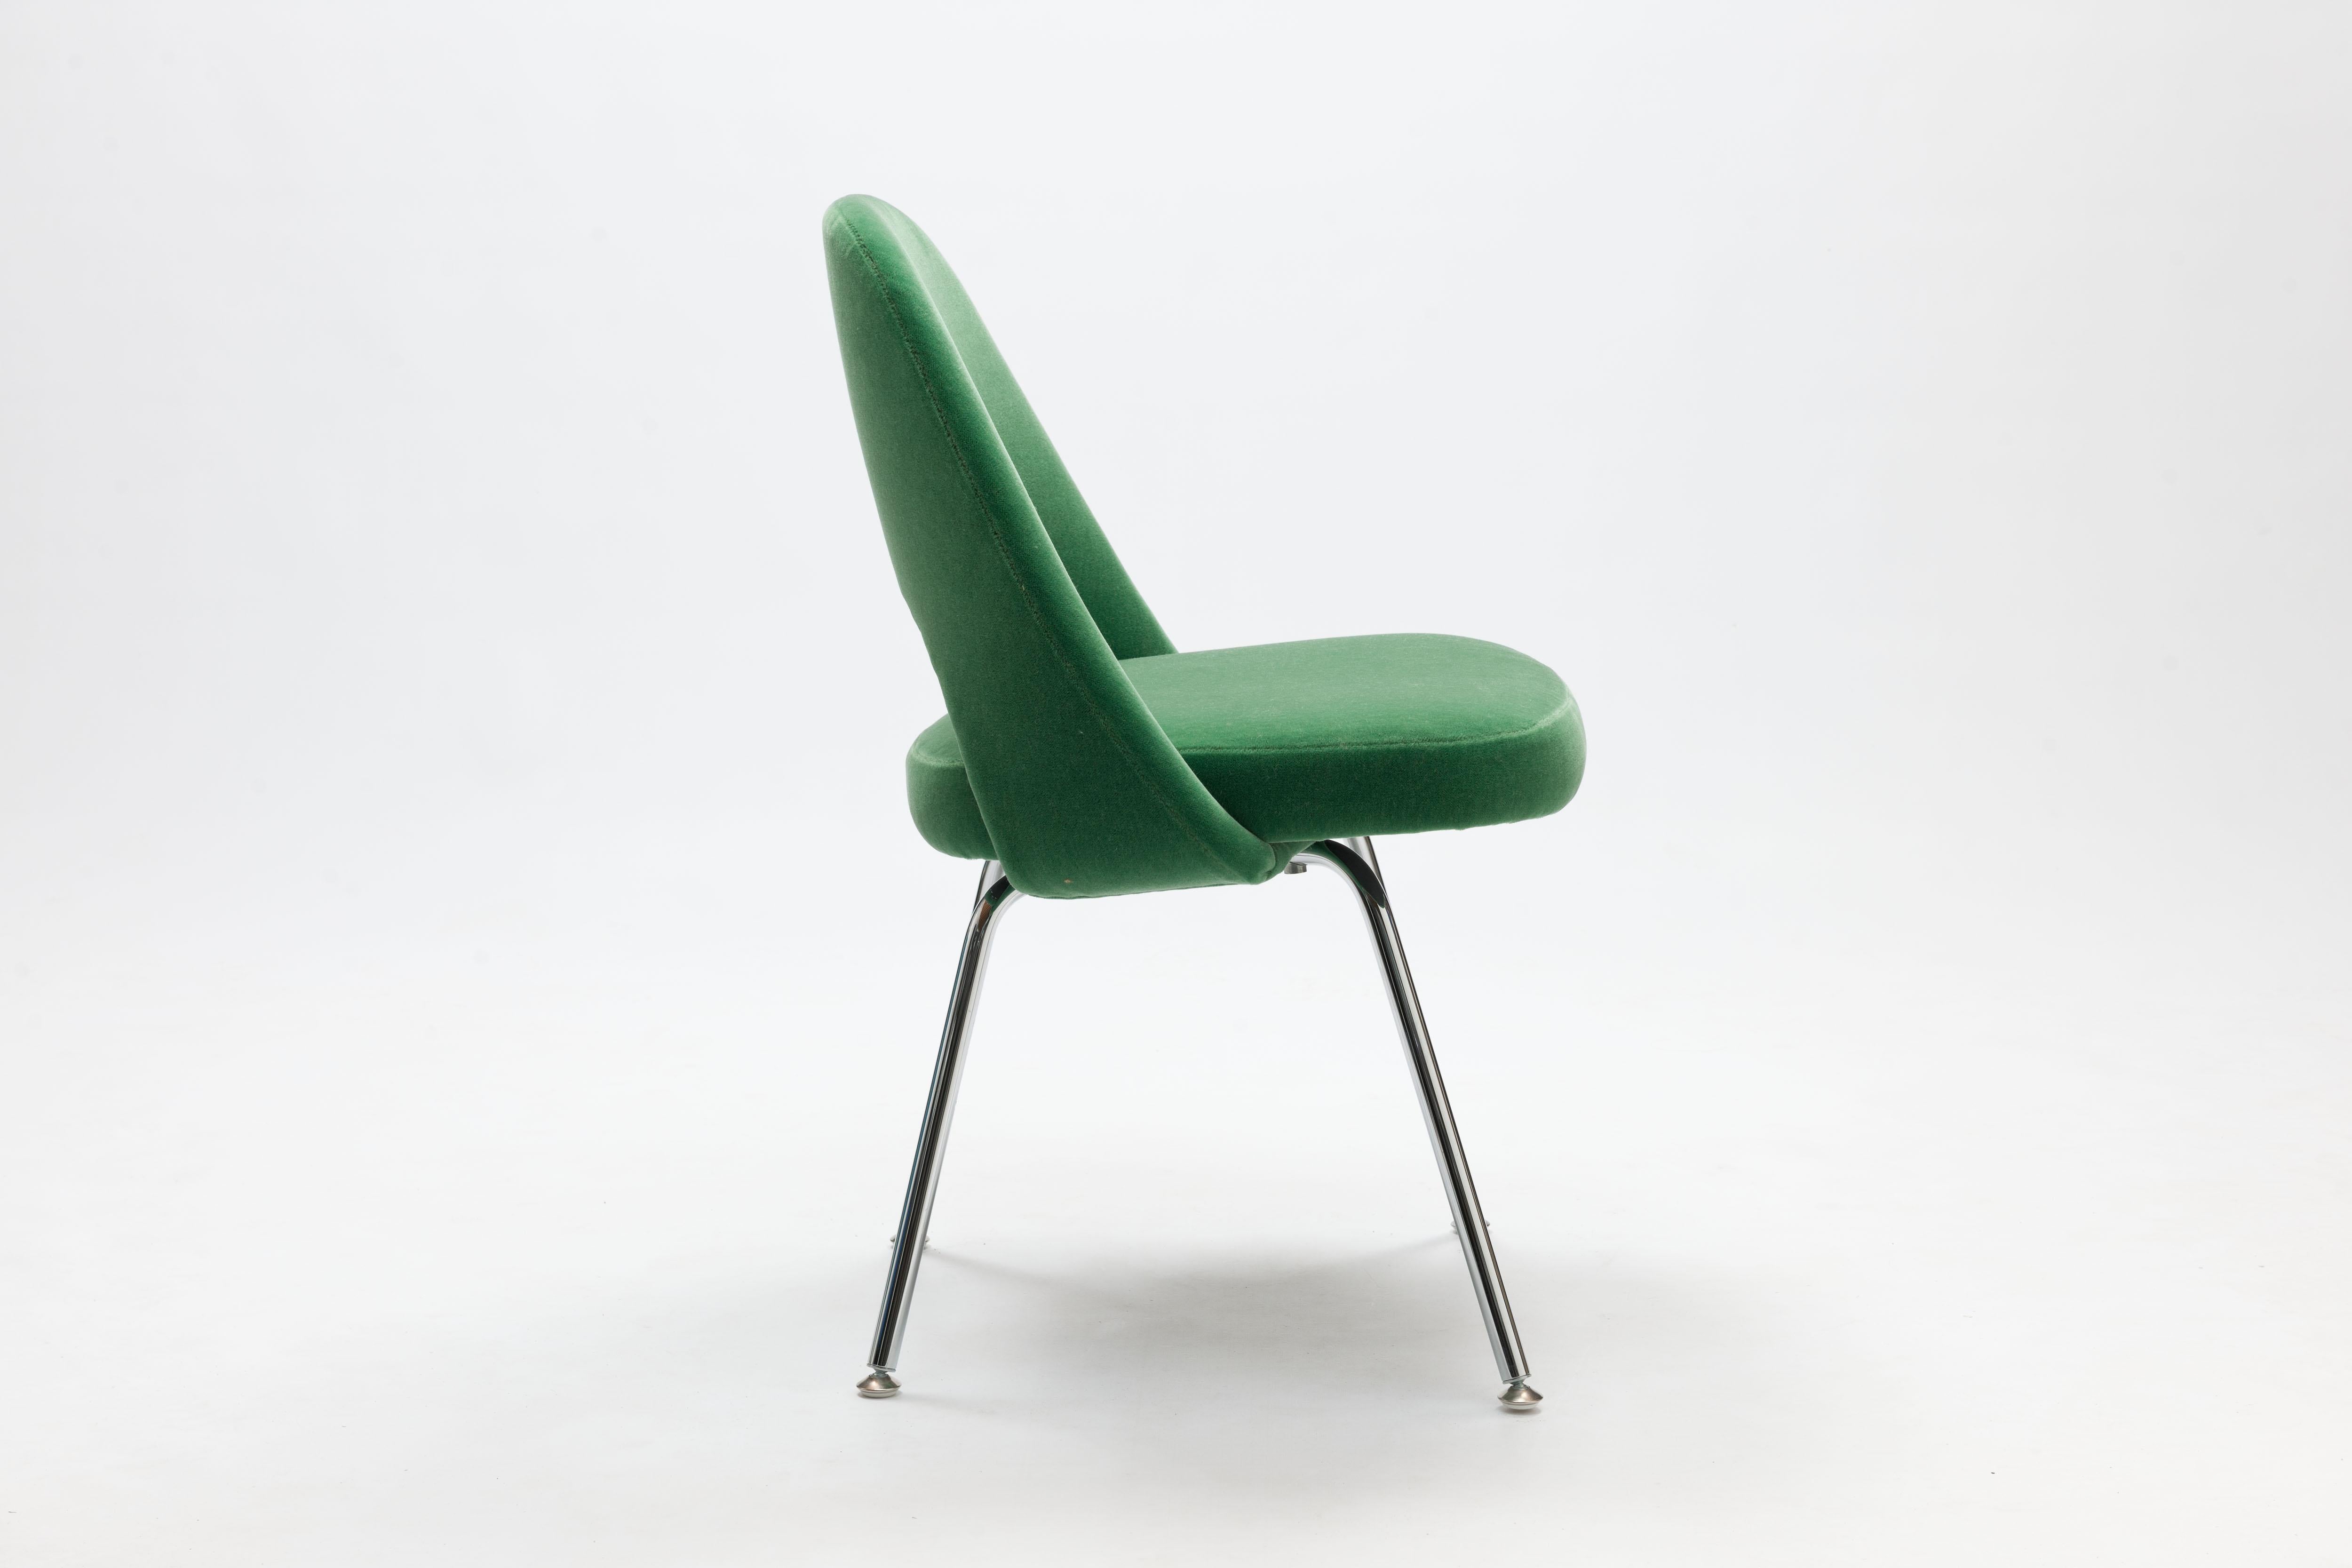 Mid-20th Century Eero Saarinen Model 72, Executive Side Chair in Green Mohair Fabric by Knoll